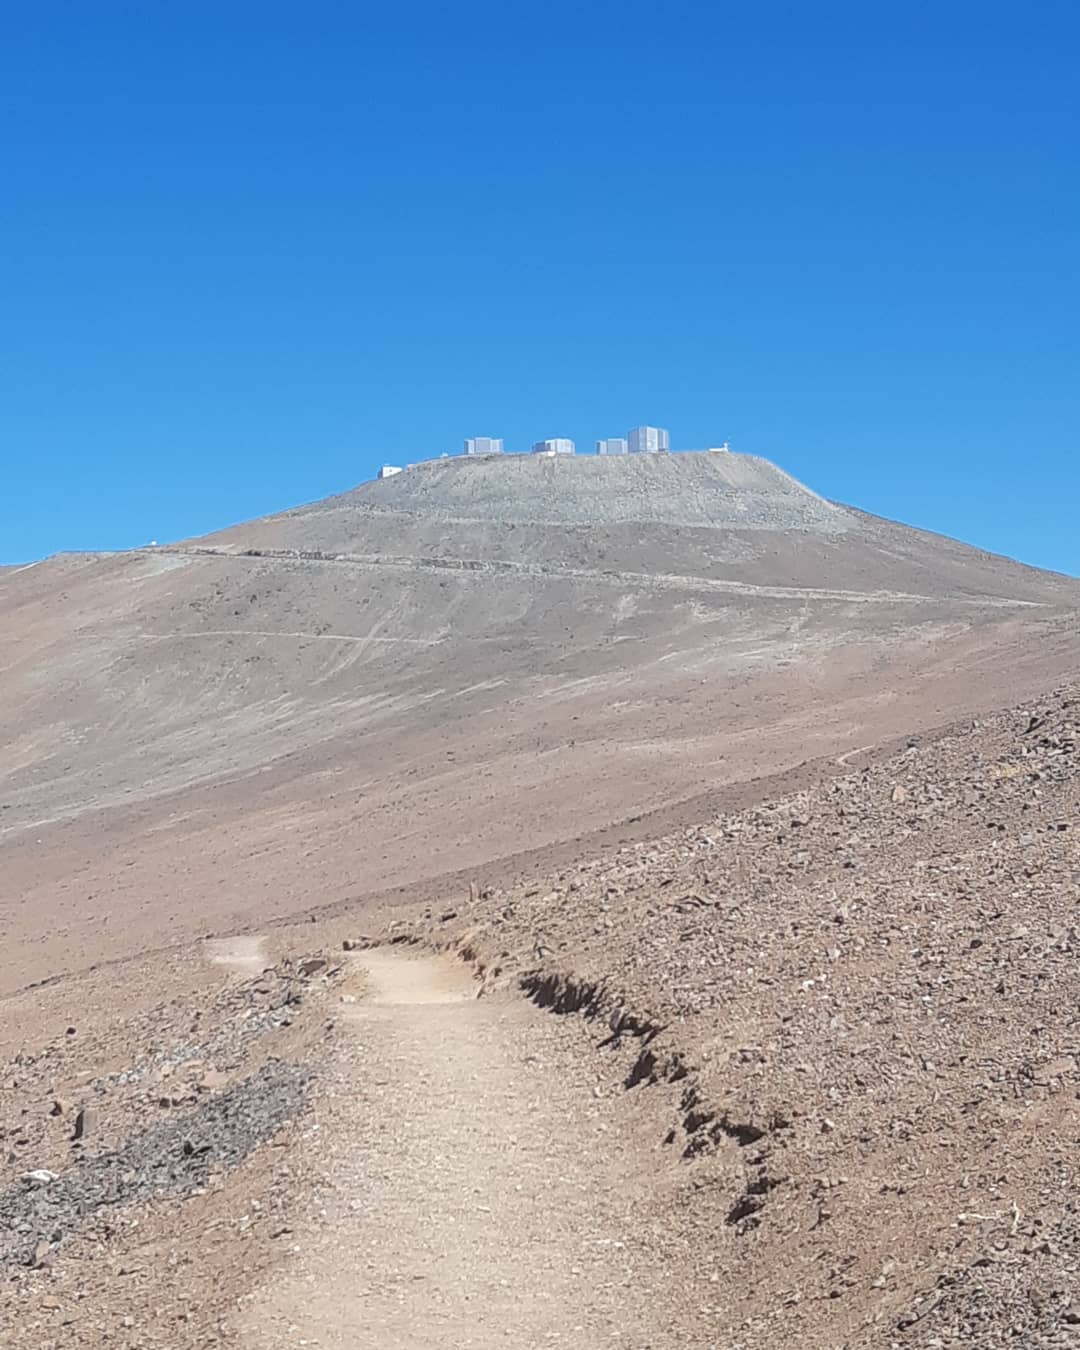 A closer view of The Very Large Telescope at Paranal, Chile.